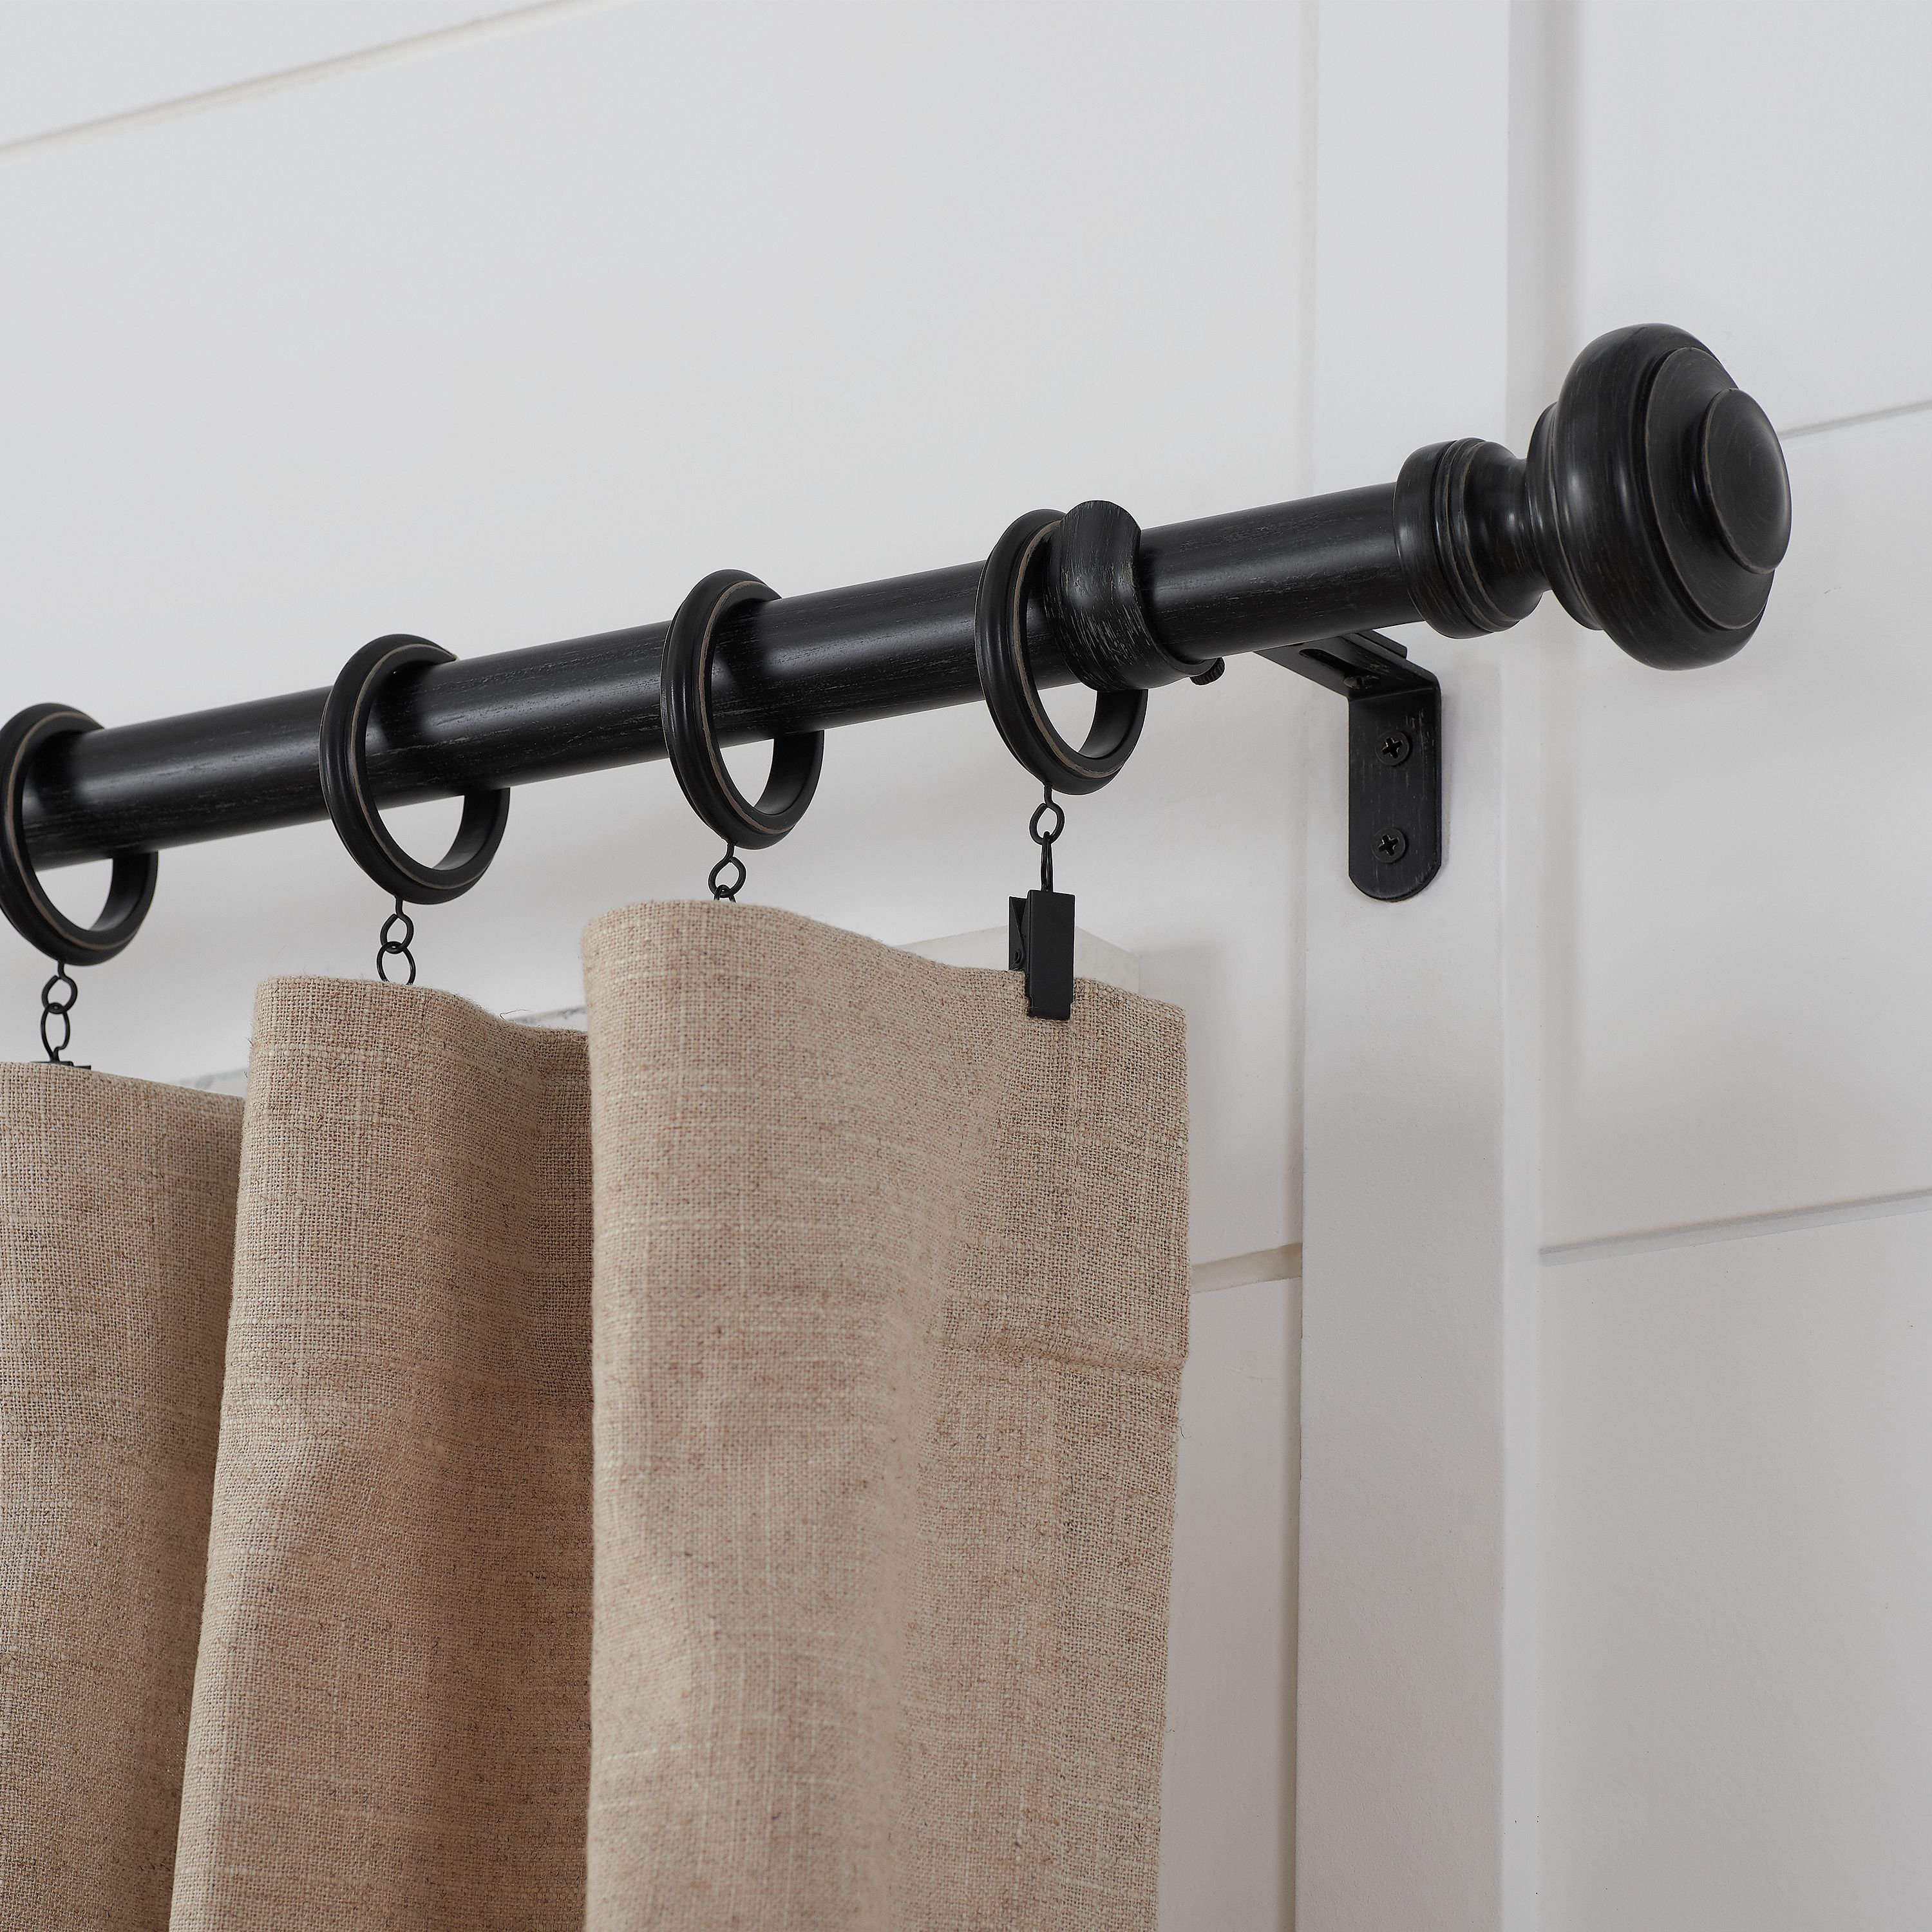 Mode Farmhouse Collection 1 1/8 Diameter Curtain Rod Set with Porch Doorknob Curtain Rod Finials and Steel Wall Mounted Adjustable Curtain Rod, Fits